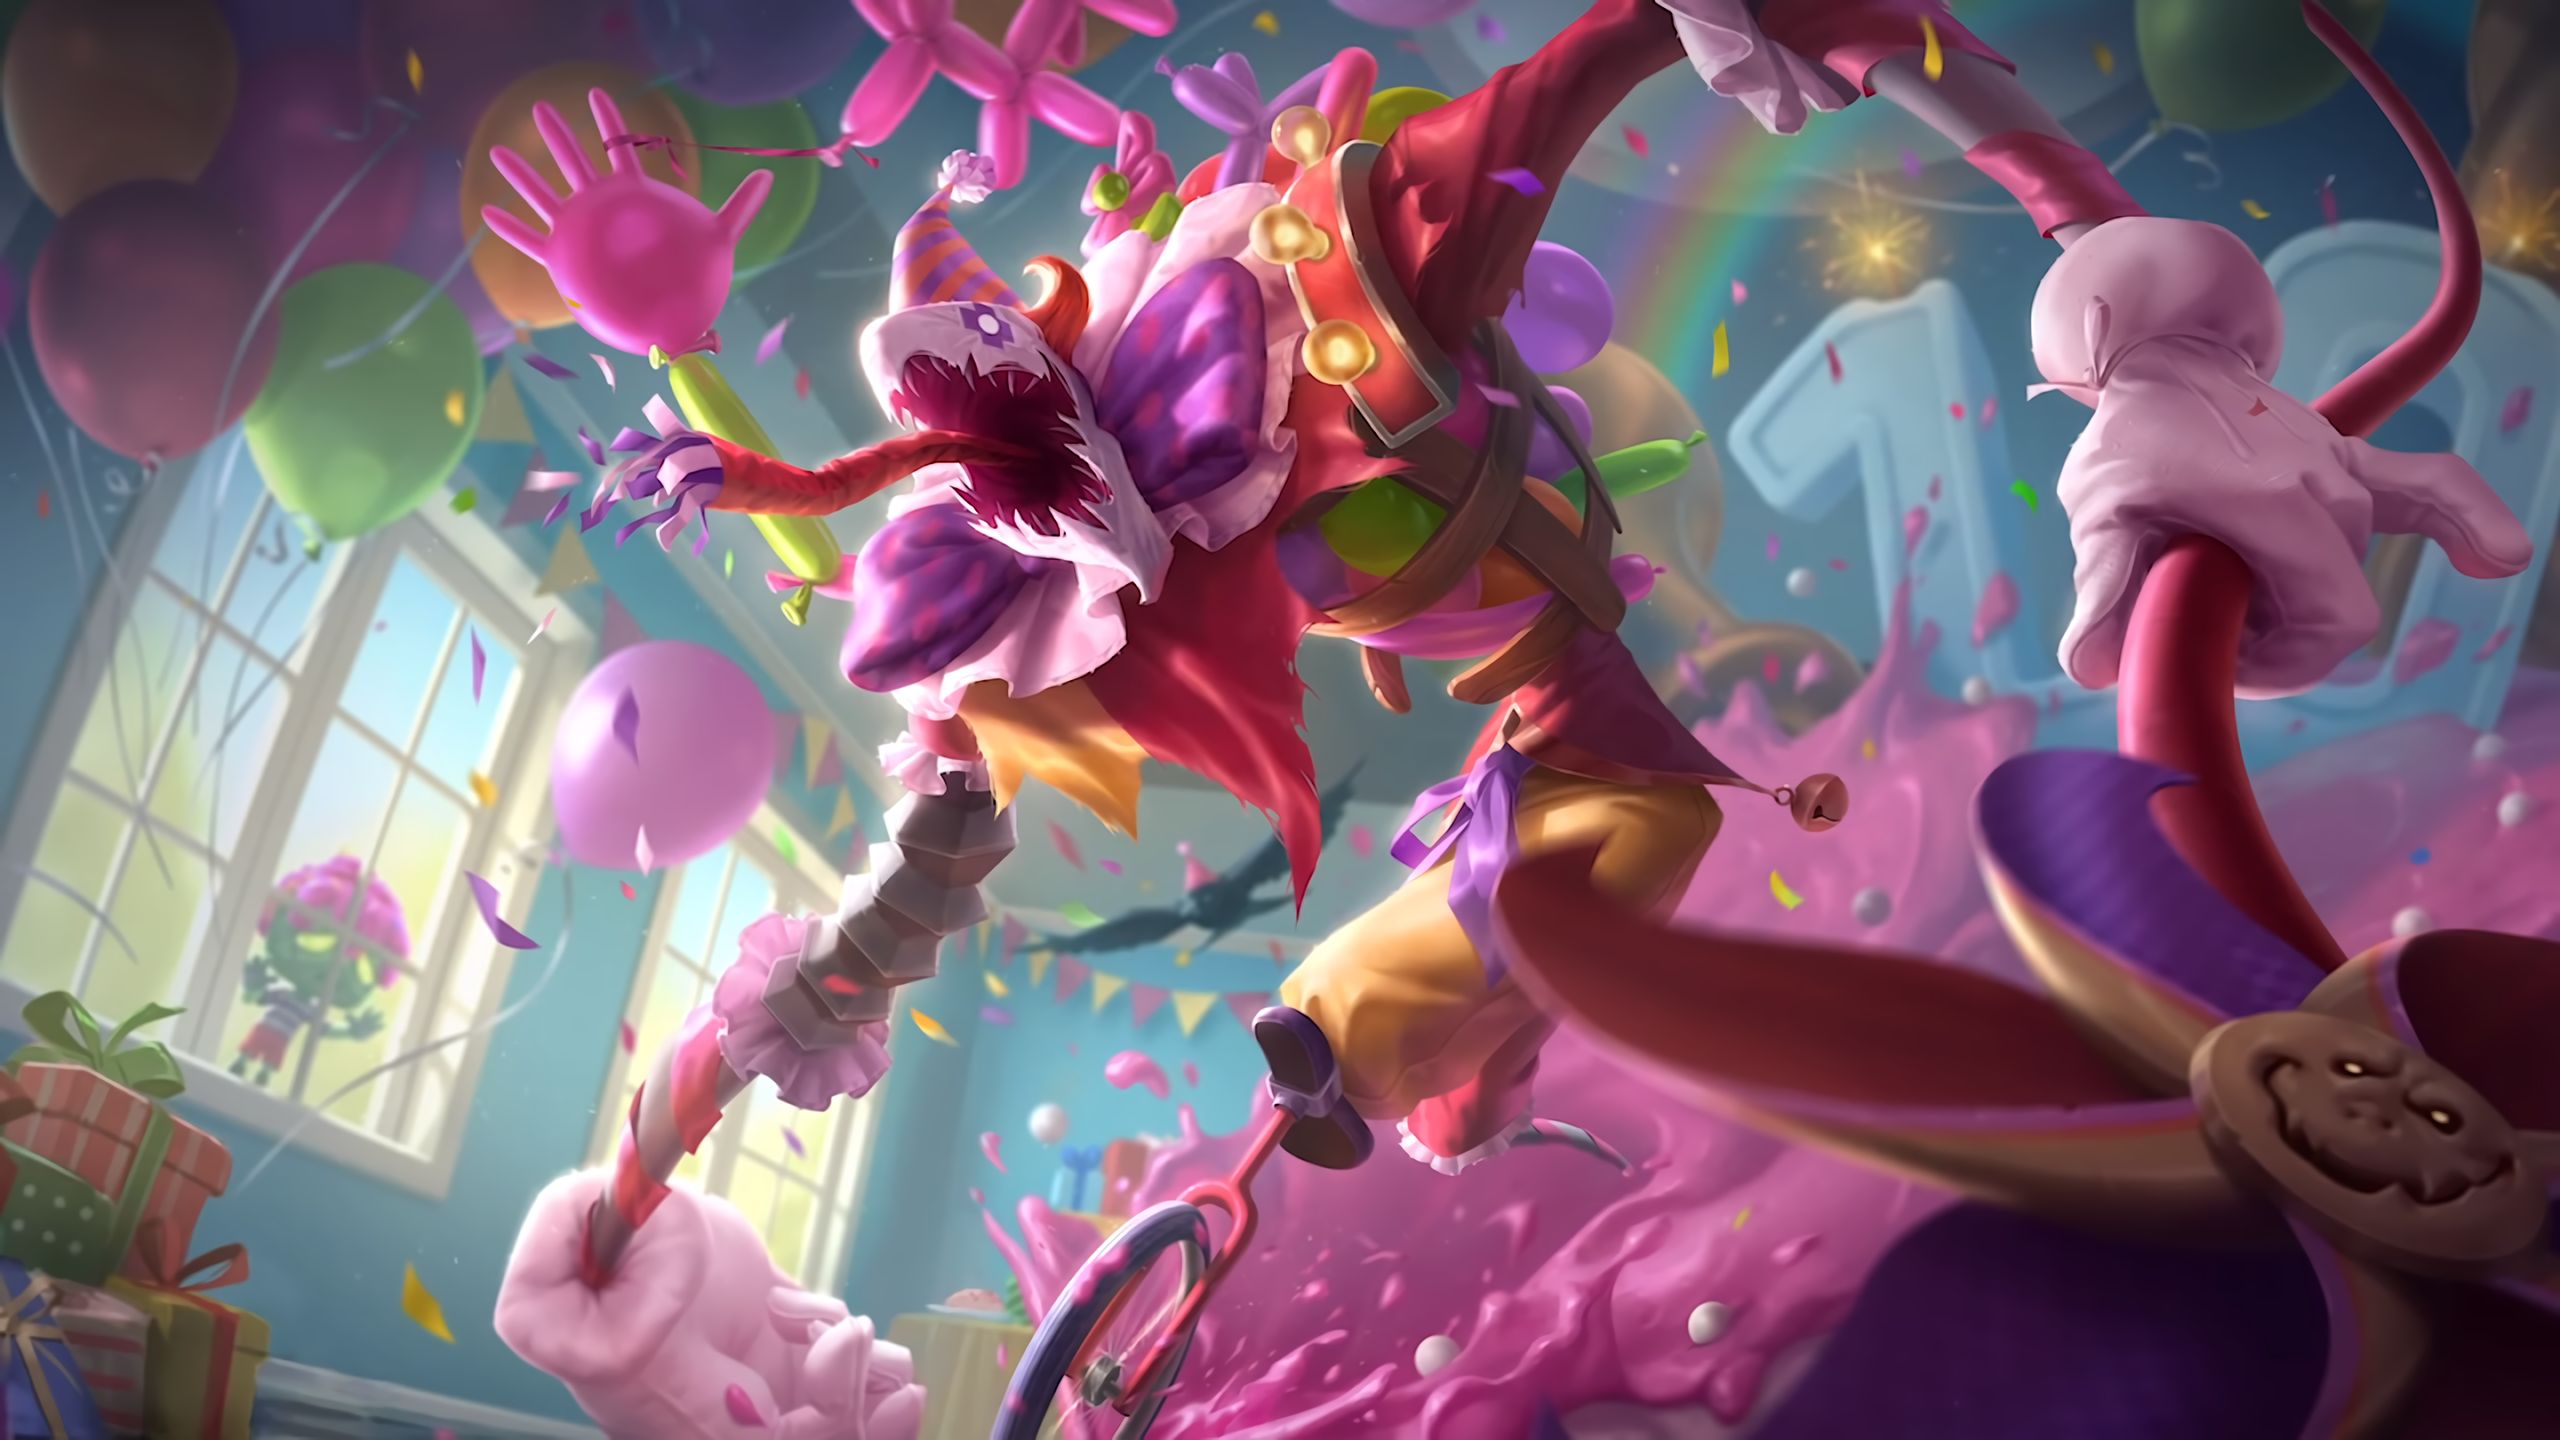 Wallpapers: Fiddlesticks rework skins (Praetorian, Risen, Dark Candy, Surprise Party, Fiddle Me Timbers): League of Legends (Picture by Riot Games)